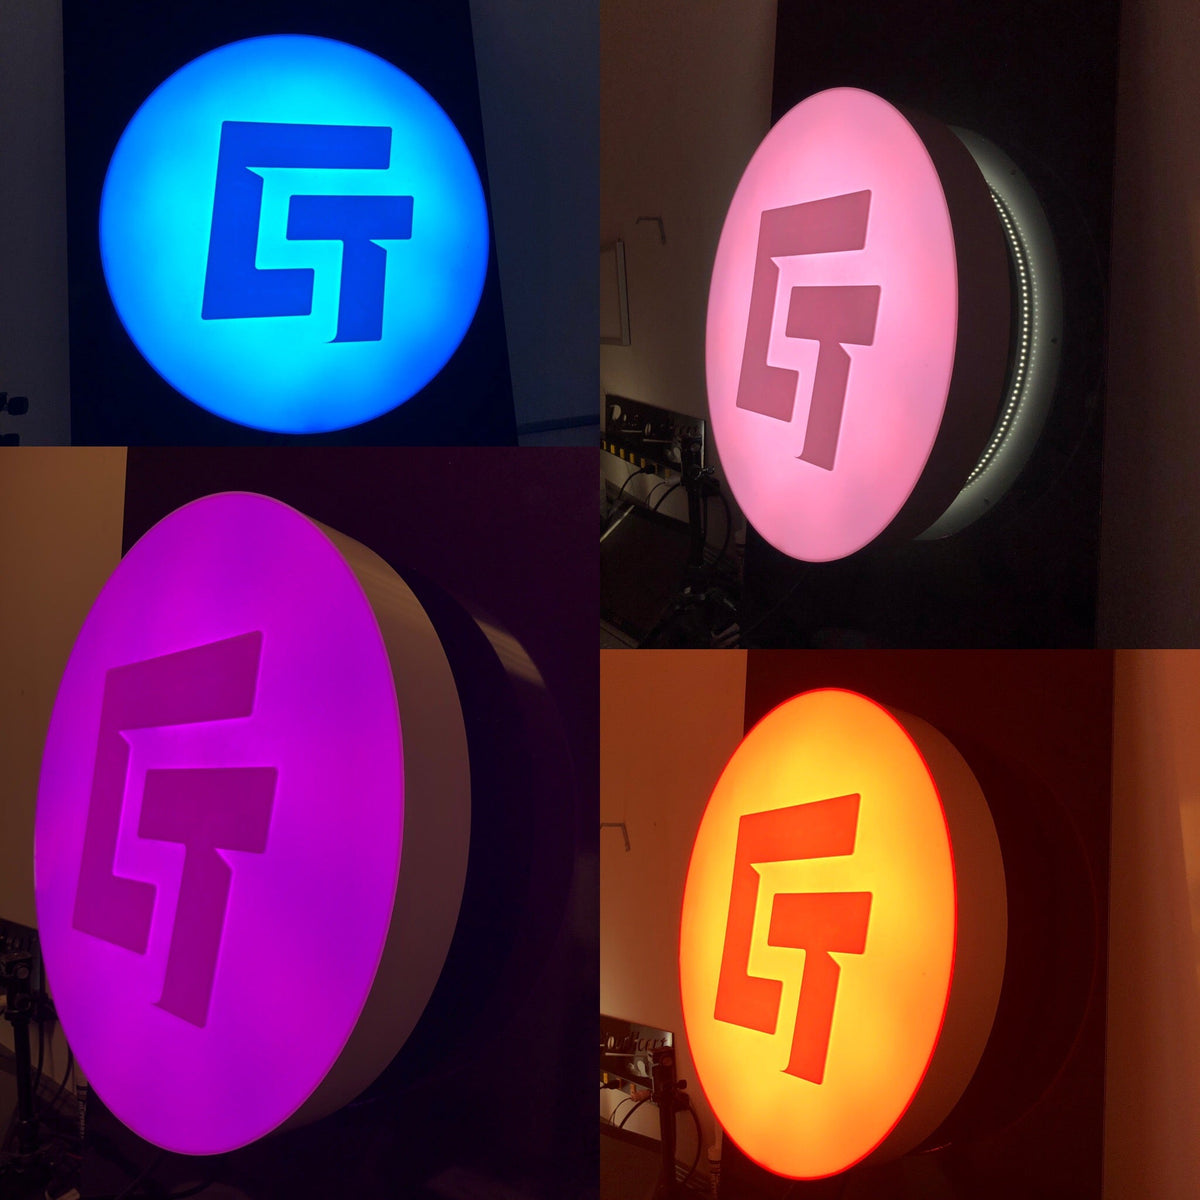 RGB LED Modules | Buy LED lighting online at Wired4Signs USA